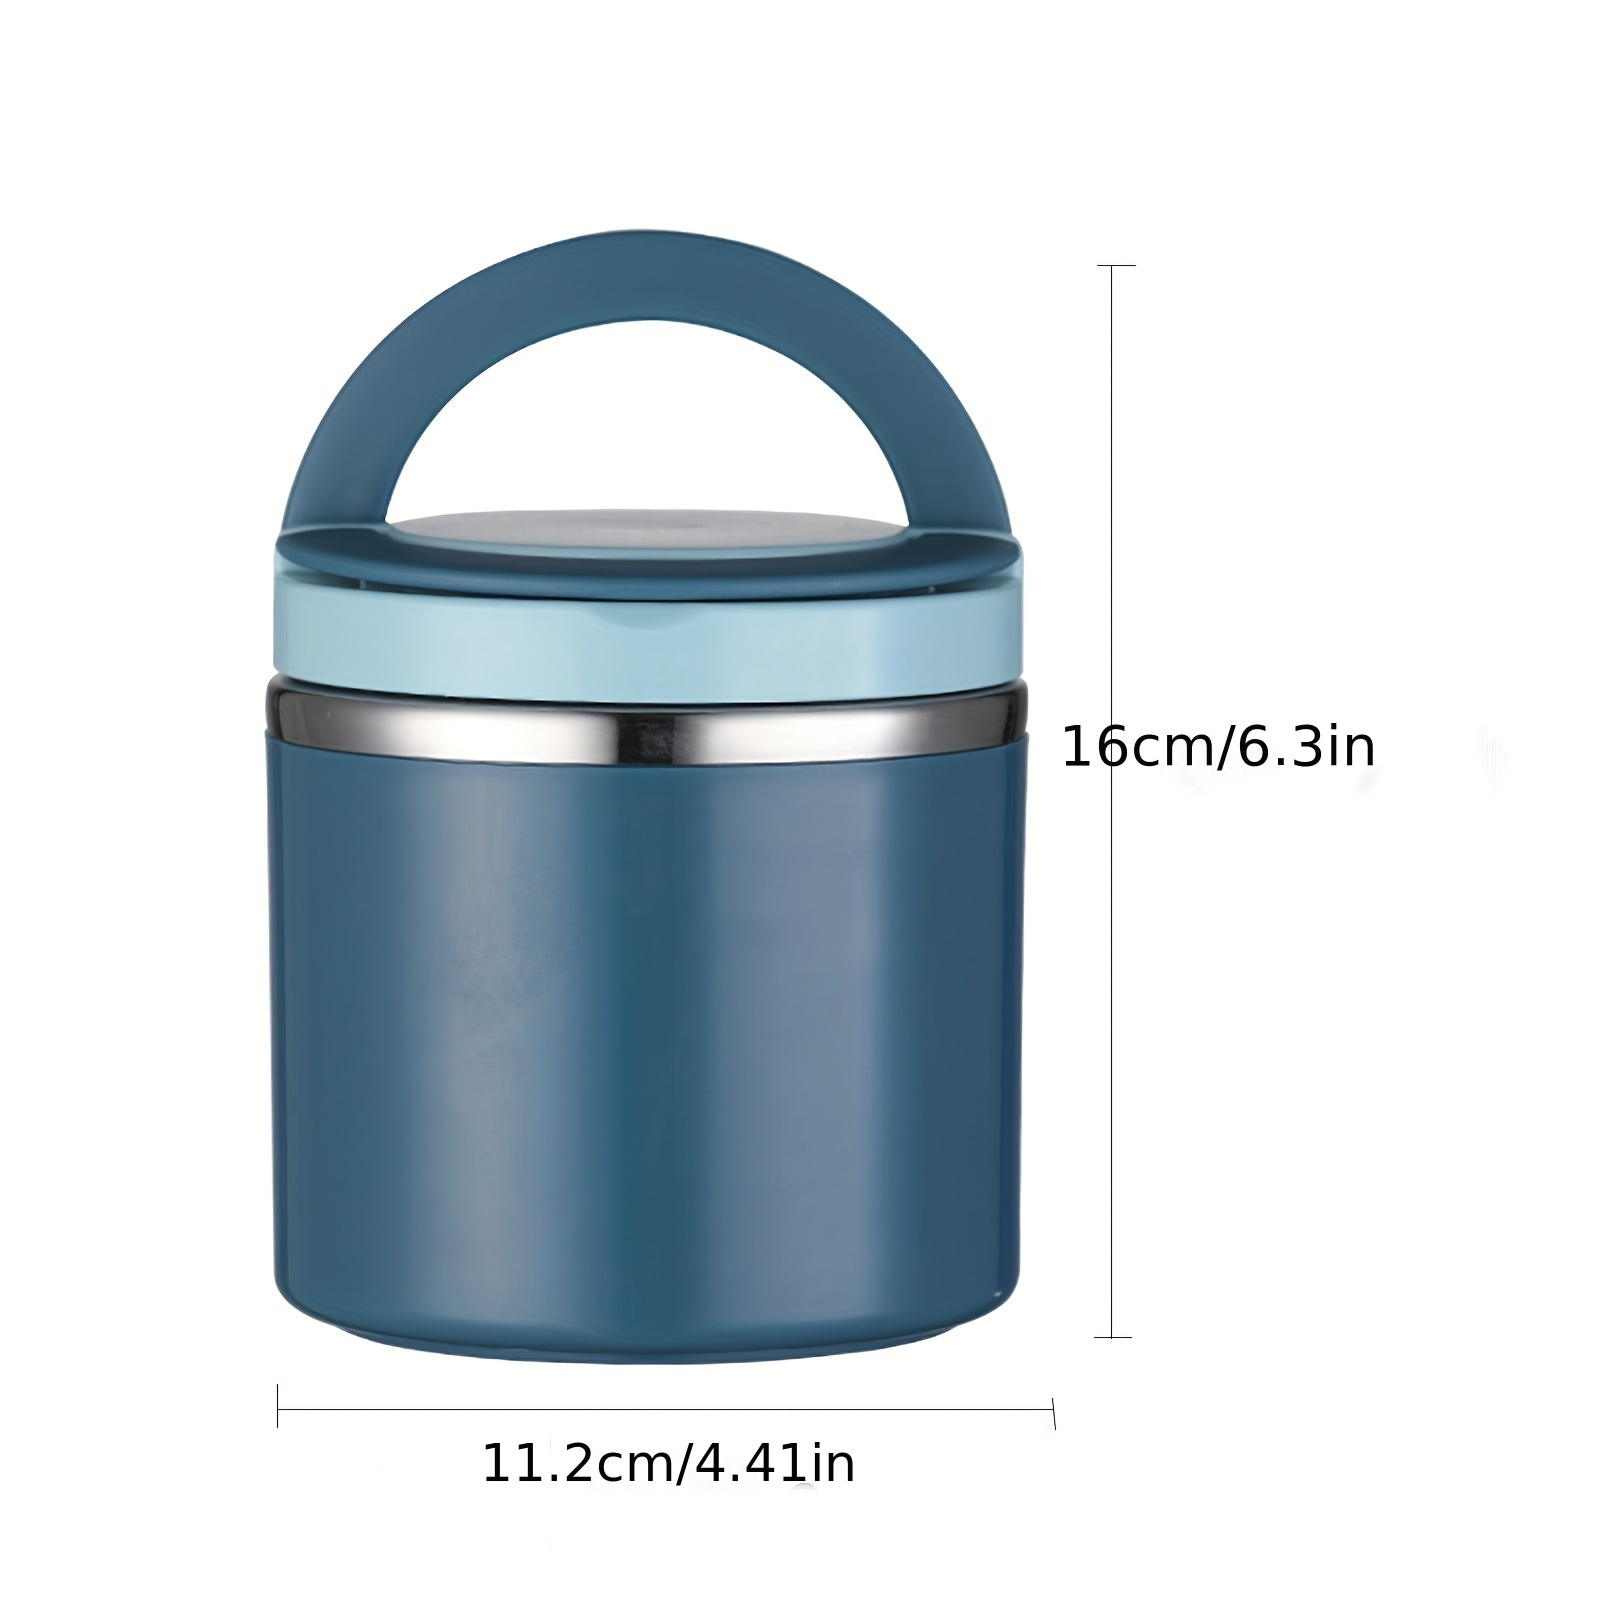 Thermos Insulated Container for Hot Food Leak Proof Hot Containers